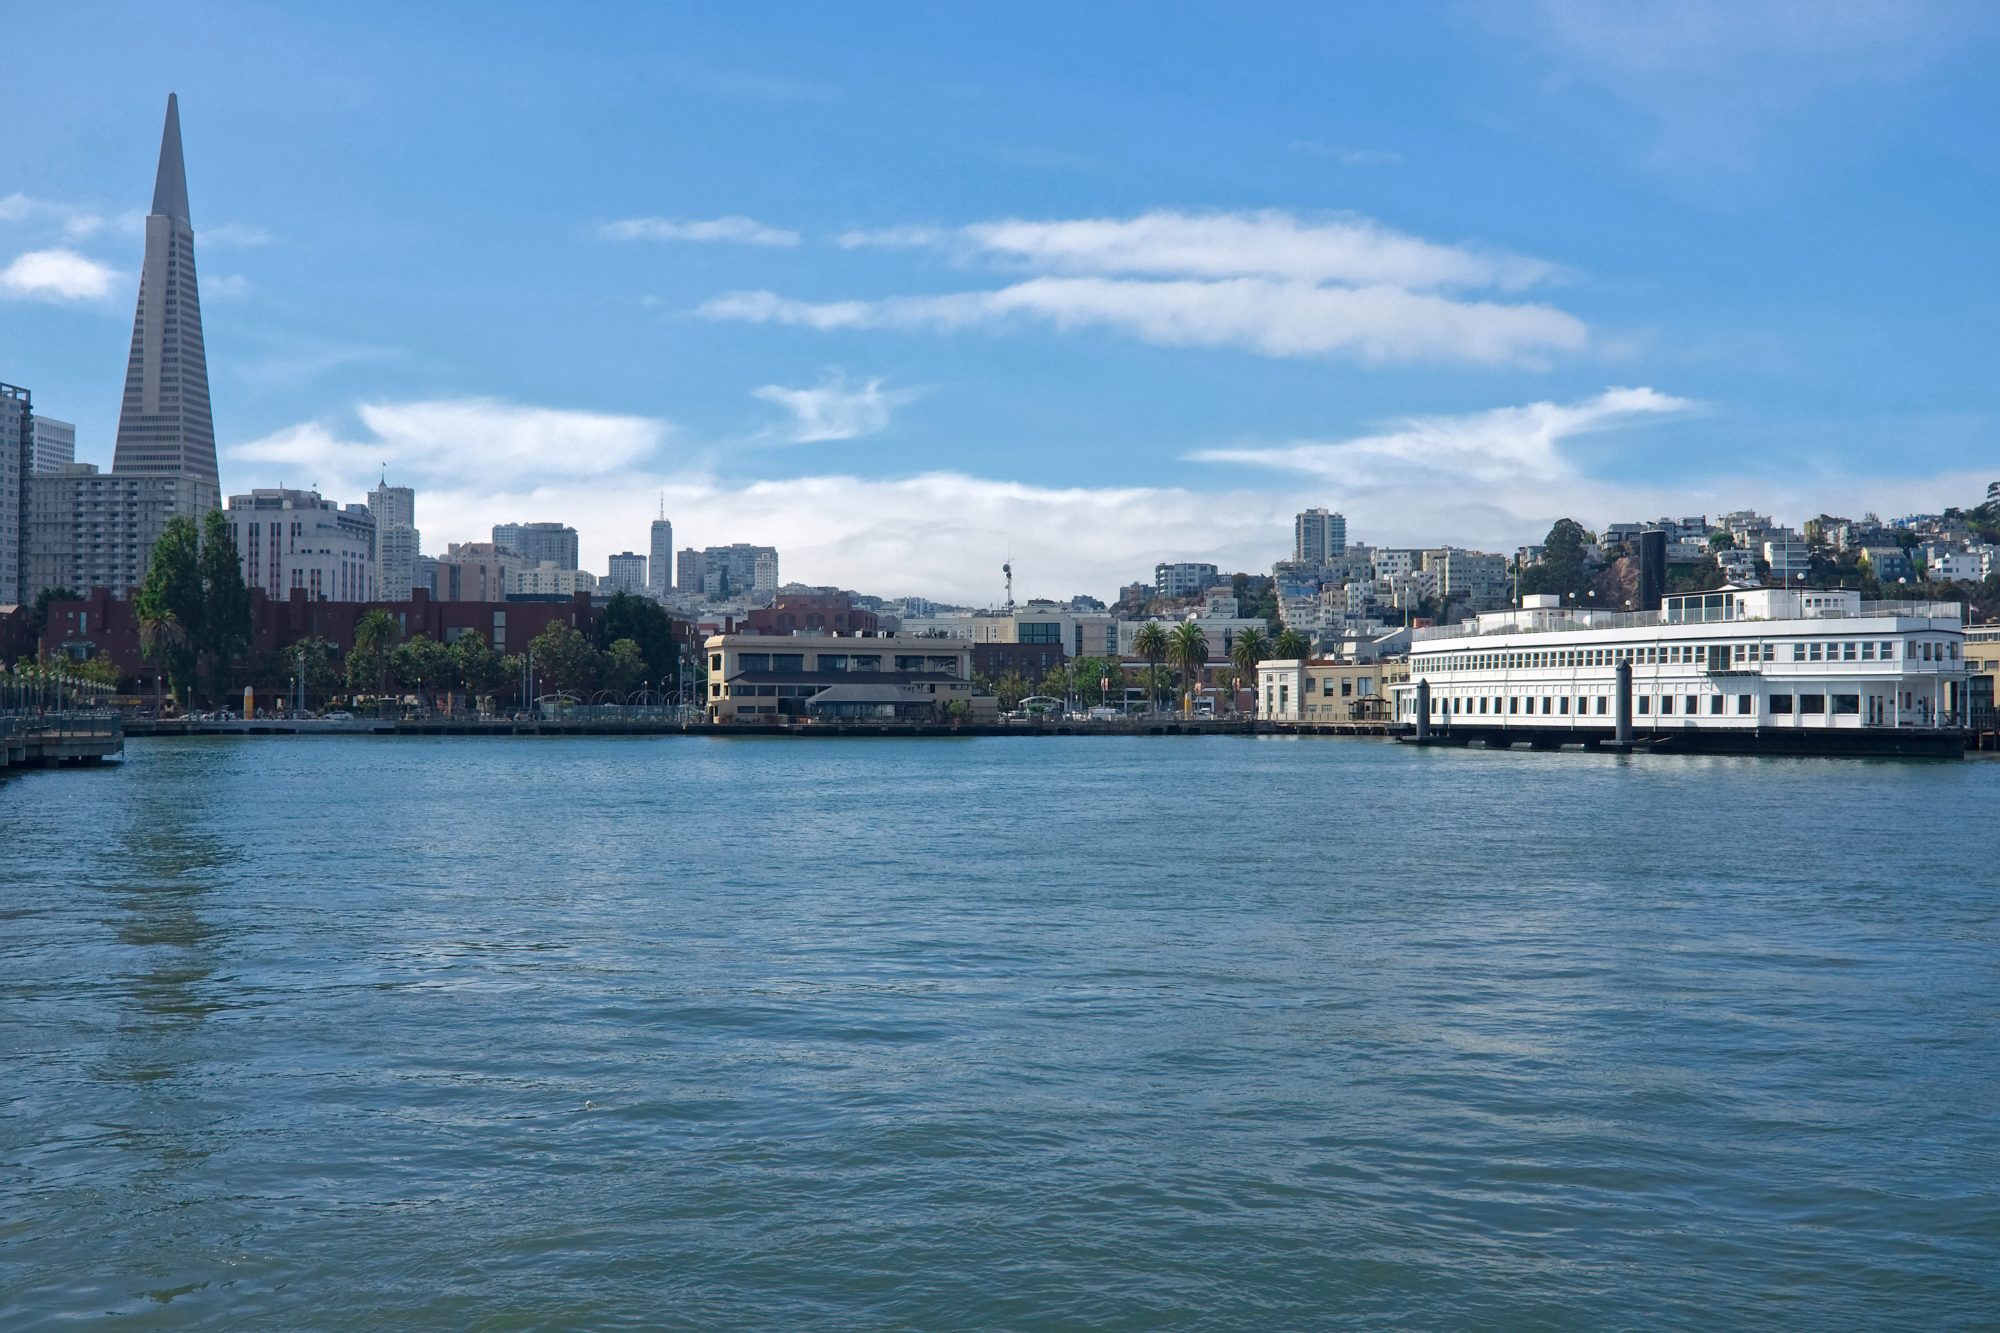 View of San Francisco from one of the city's piers